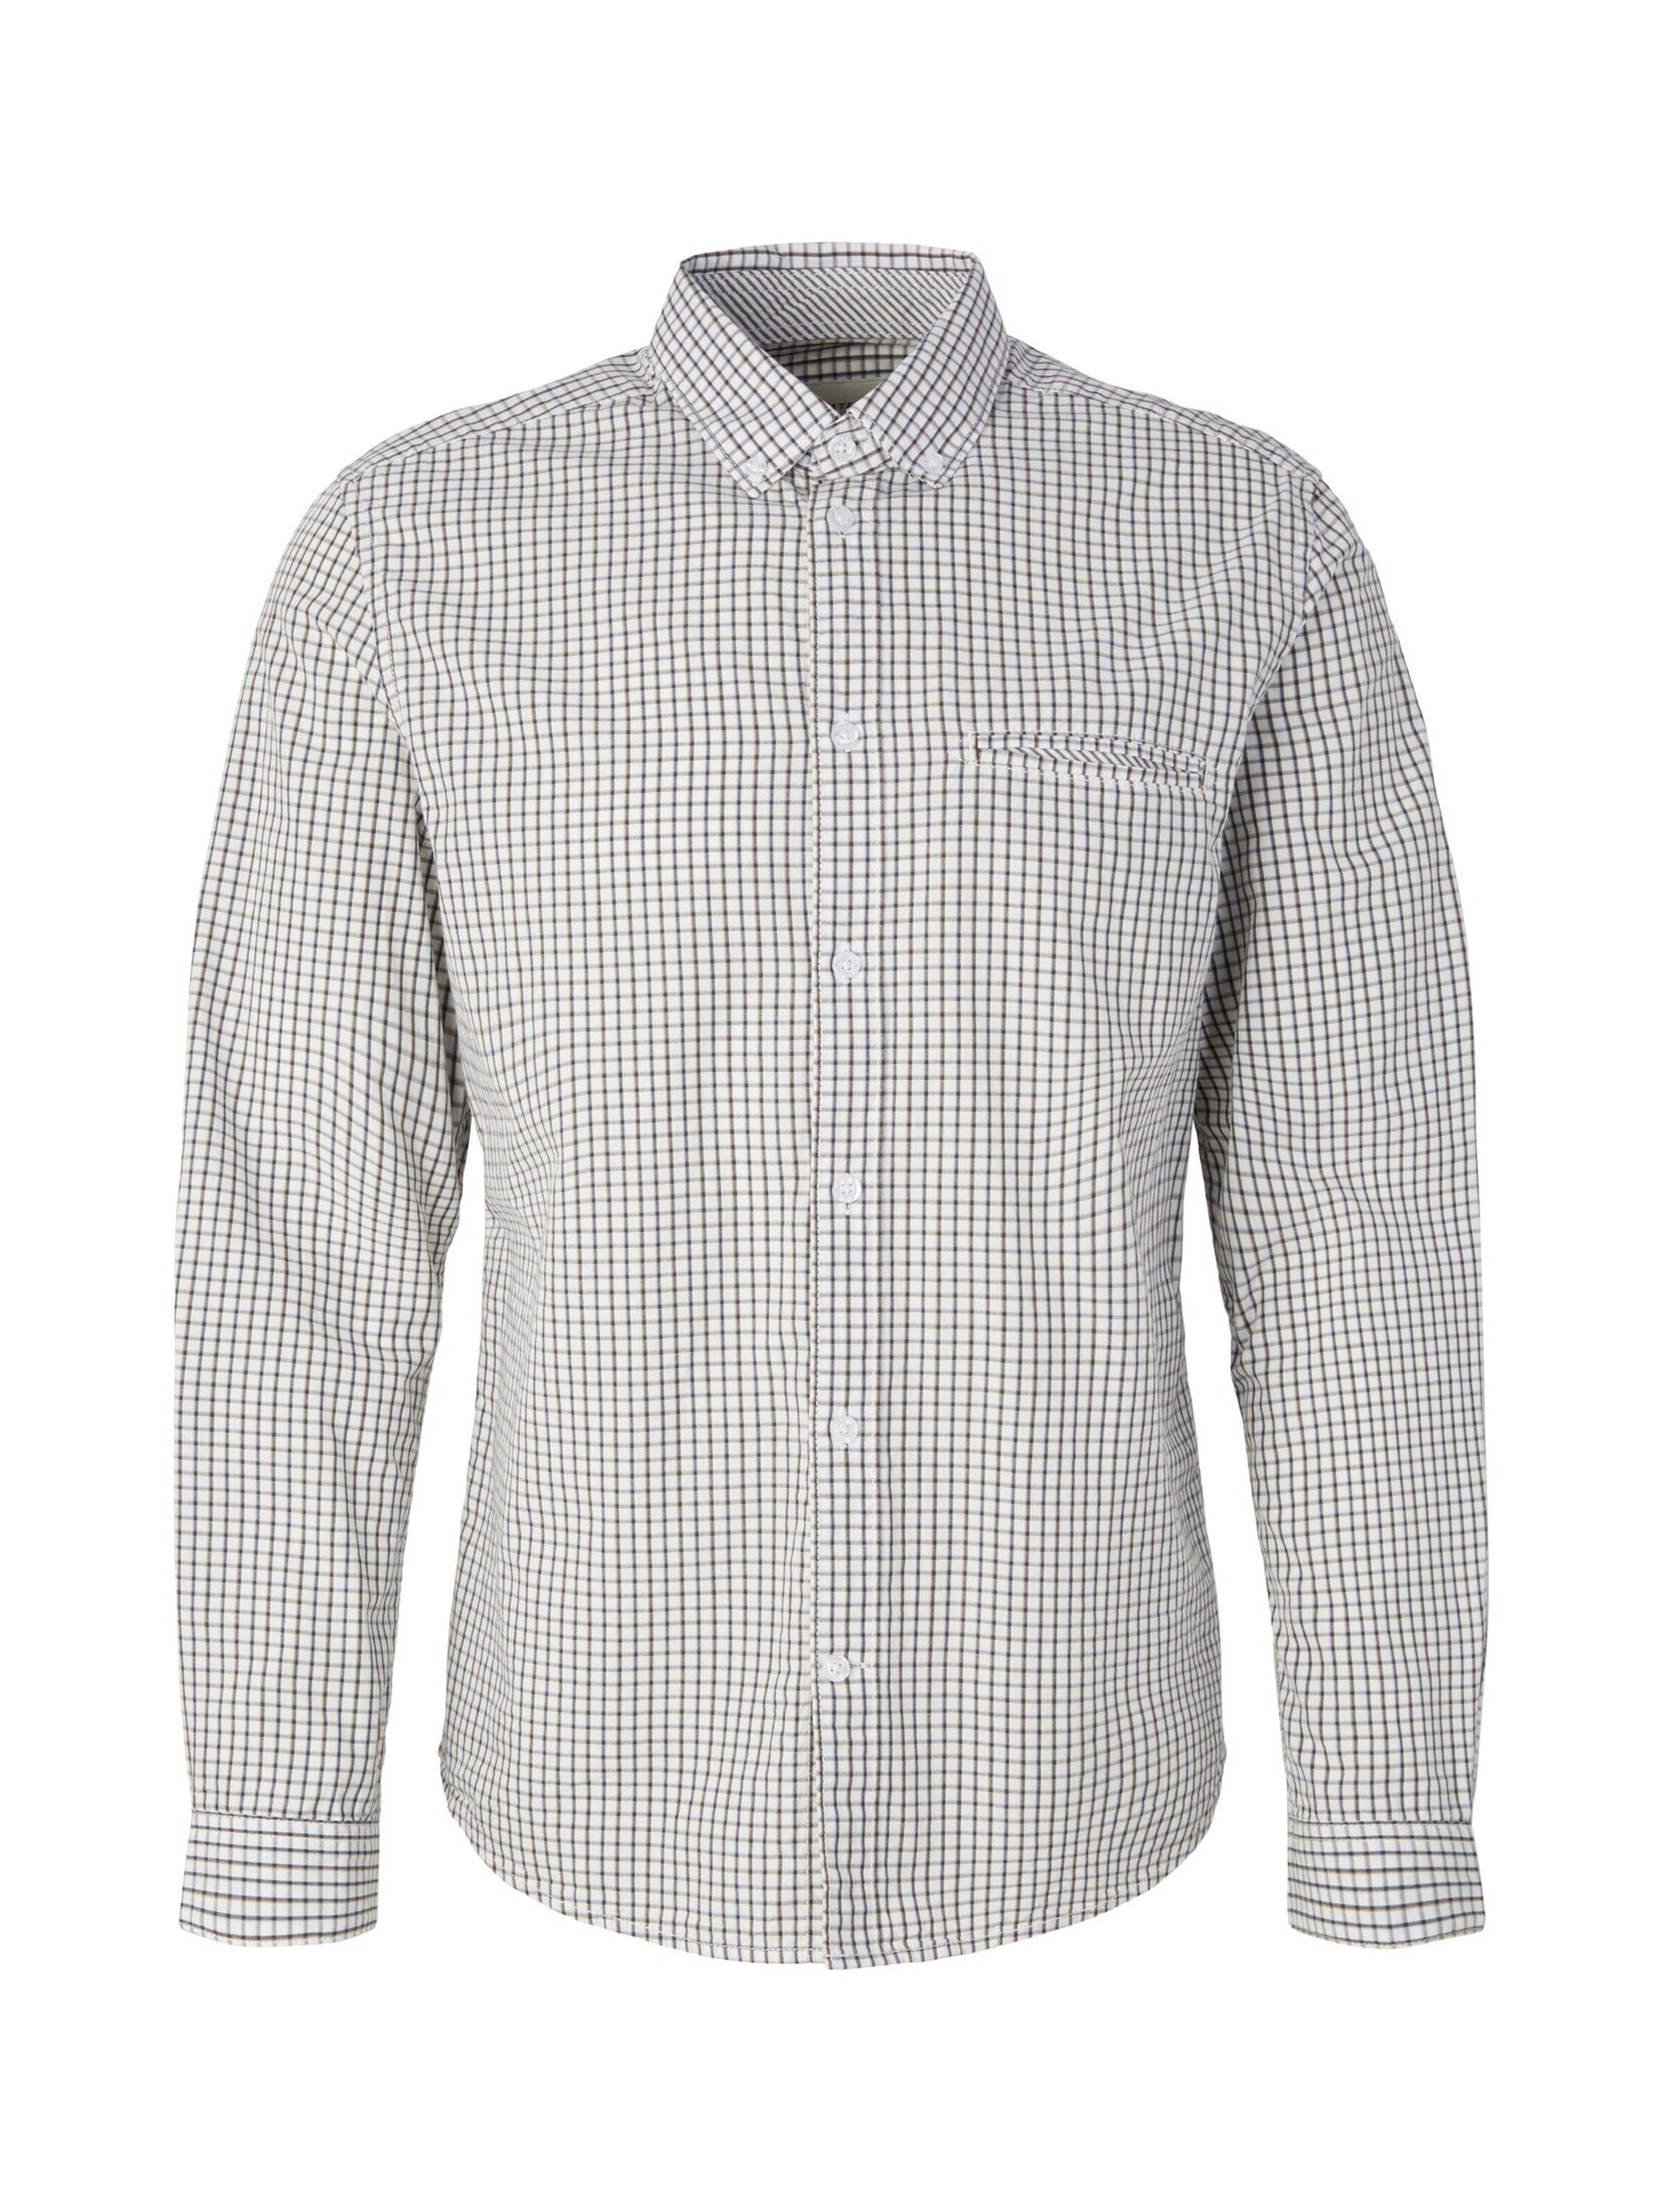 TOM TAILOR Langarmhemd (1-tlg) off white check small